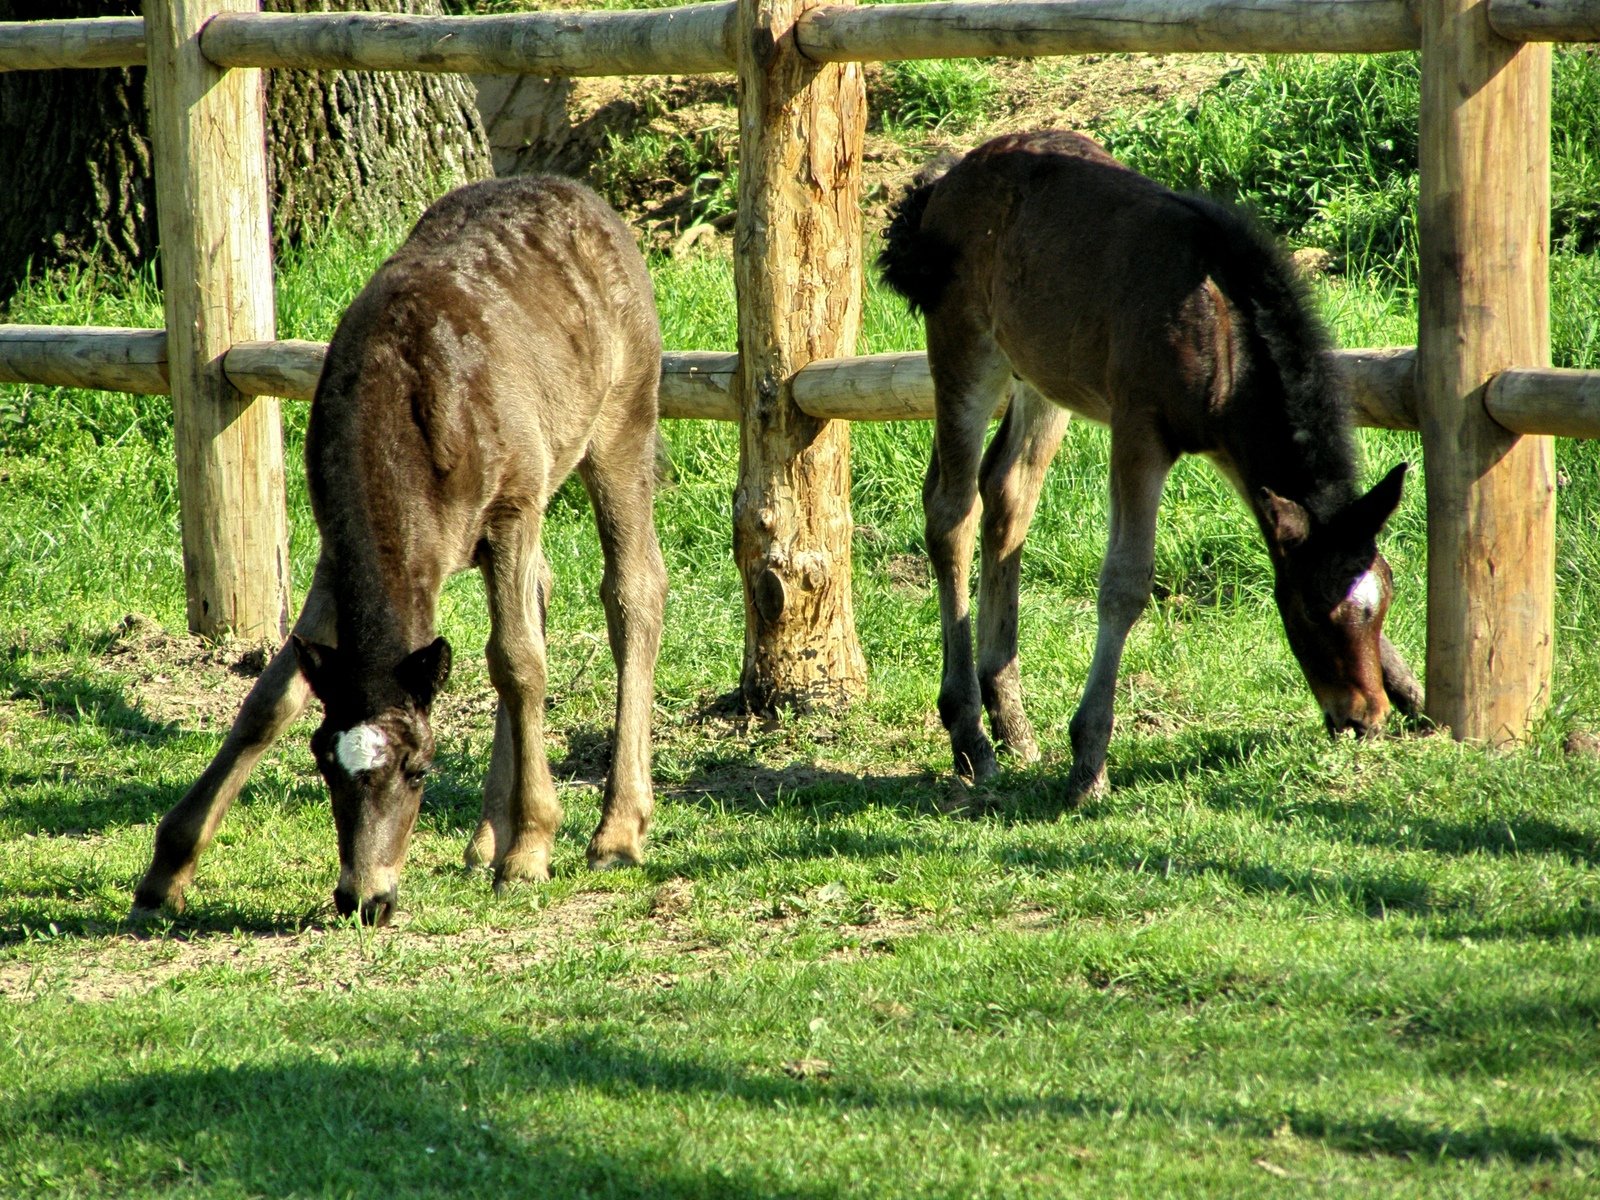 two brown horses grazing on green grass next to wooden fence